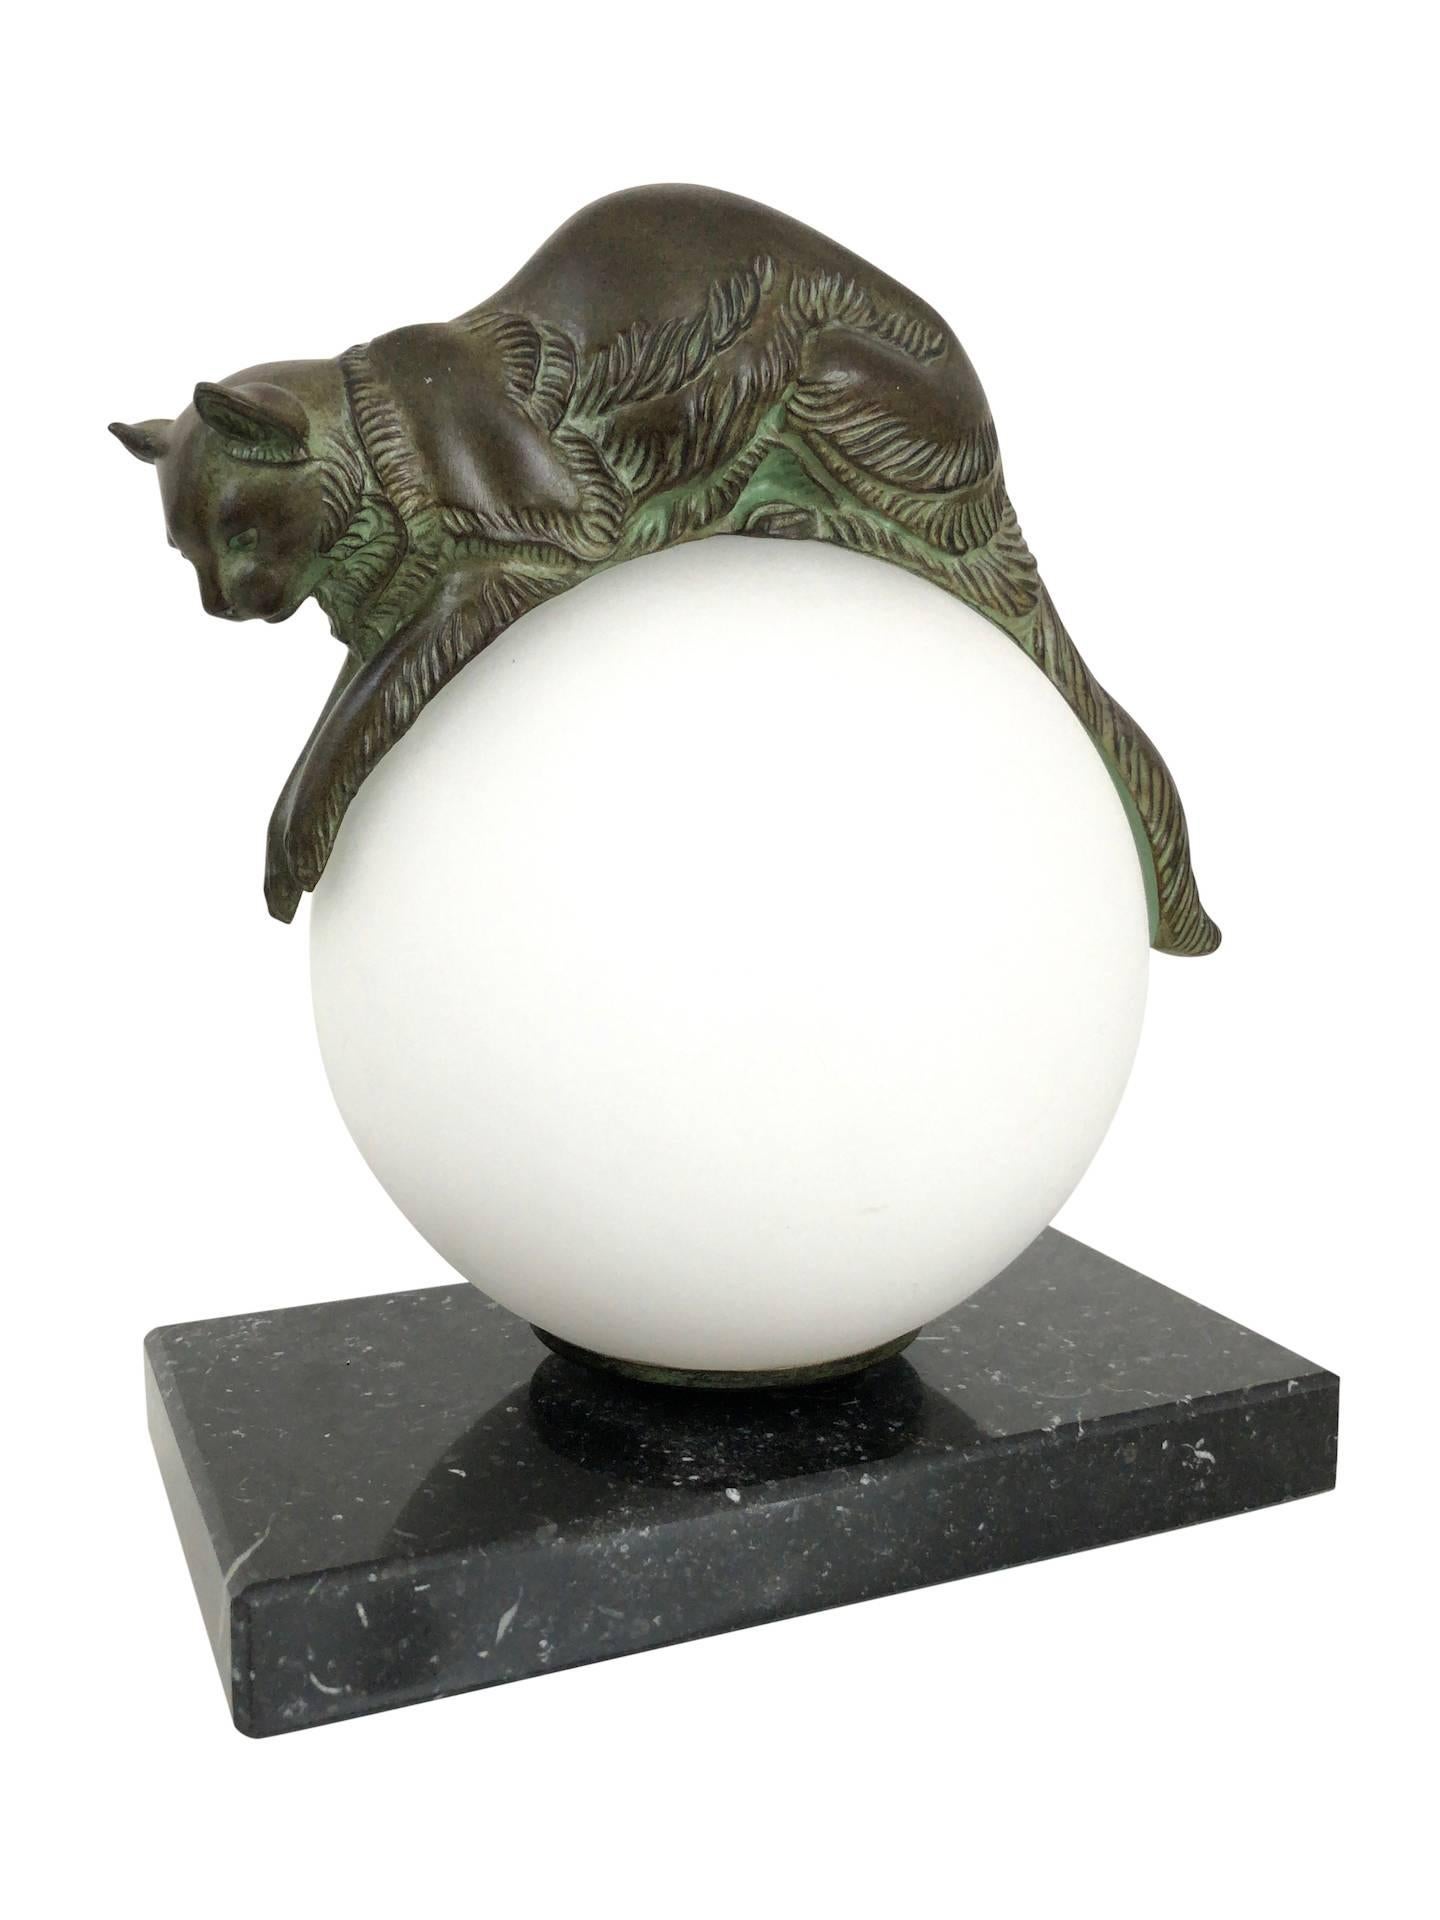 “Équilibré” (French: balanced) 
Cat keeps balance on a lighted glass ball 
Designed in France during the roaring 1920s by “Gaillard”, signed
Original “Max Le Verrier”, stamped 
Art Deco style, France.

Handmade sculpture made in “Régule”